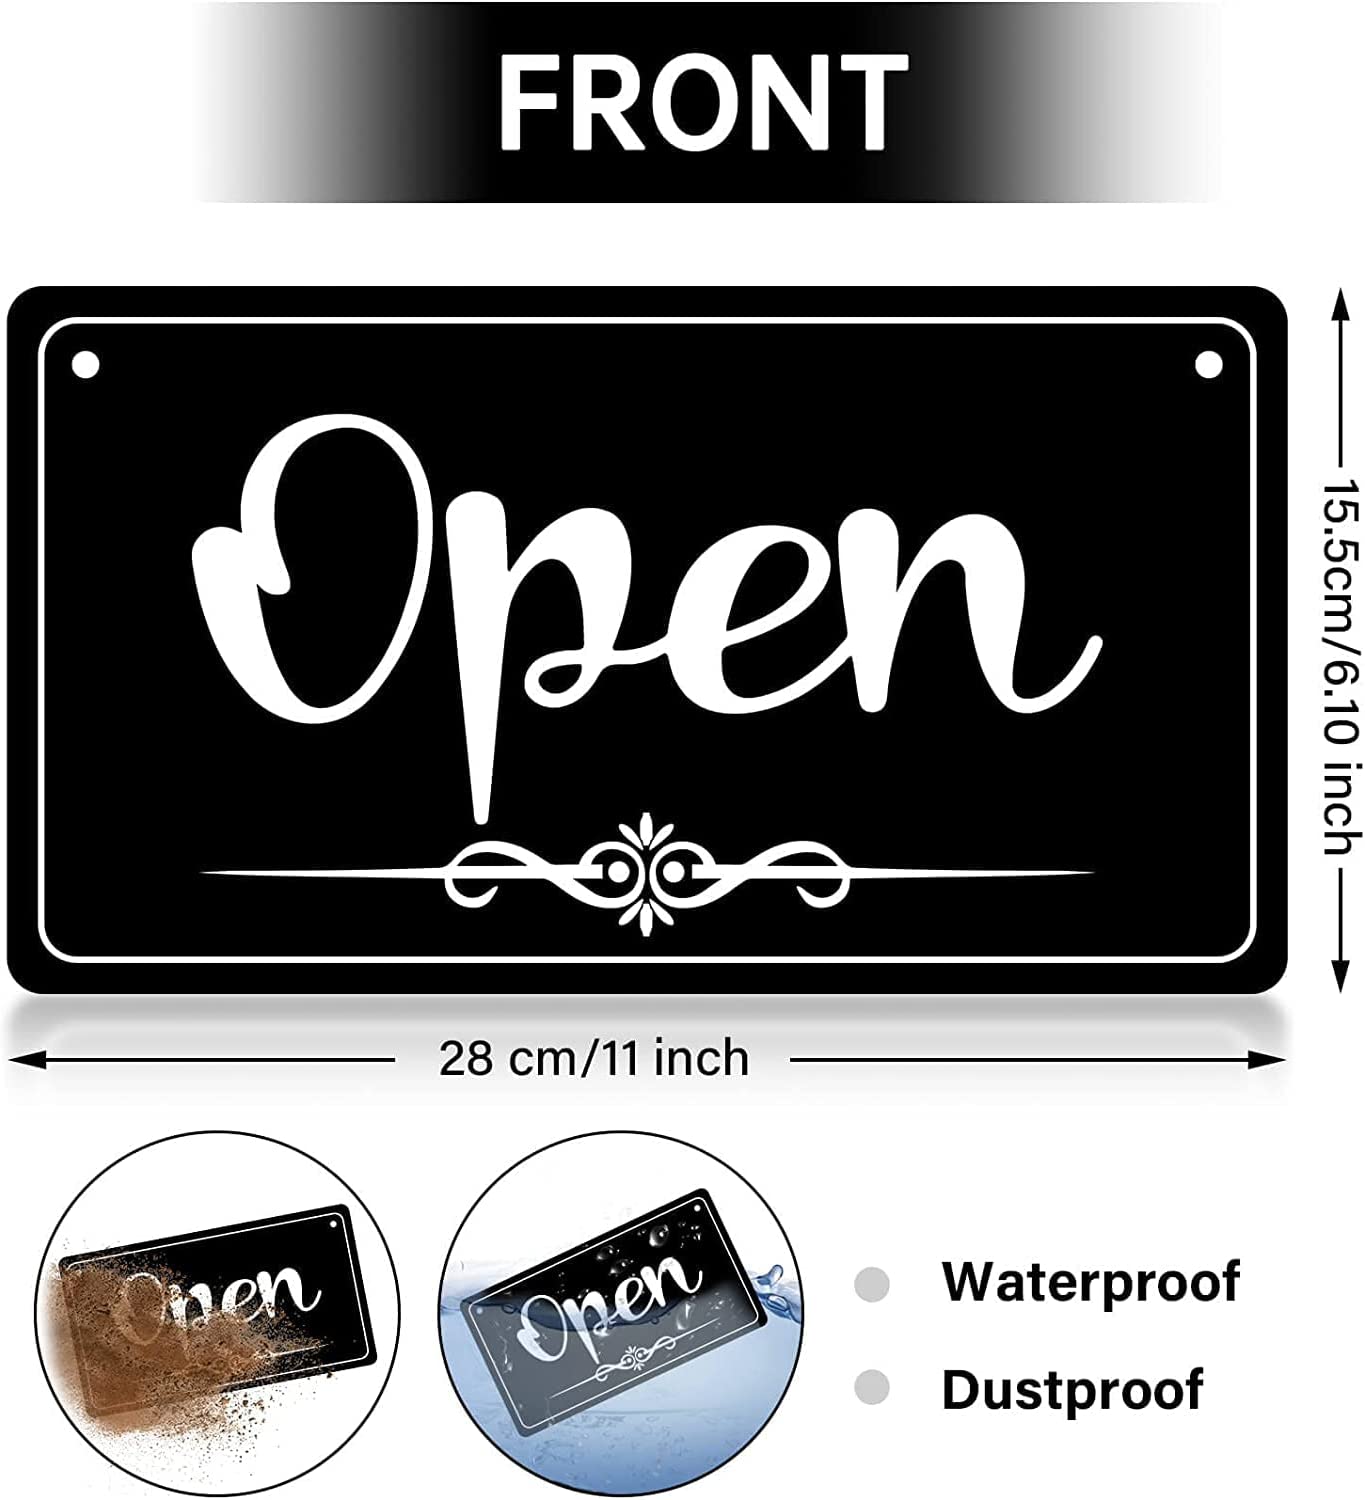 A hanging sign for store entrances, printed on a black background, two sides open and closed, on HDF wood